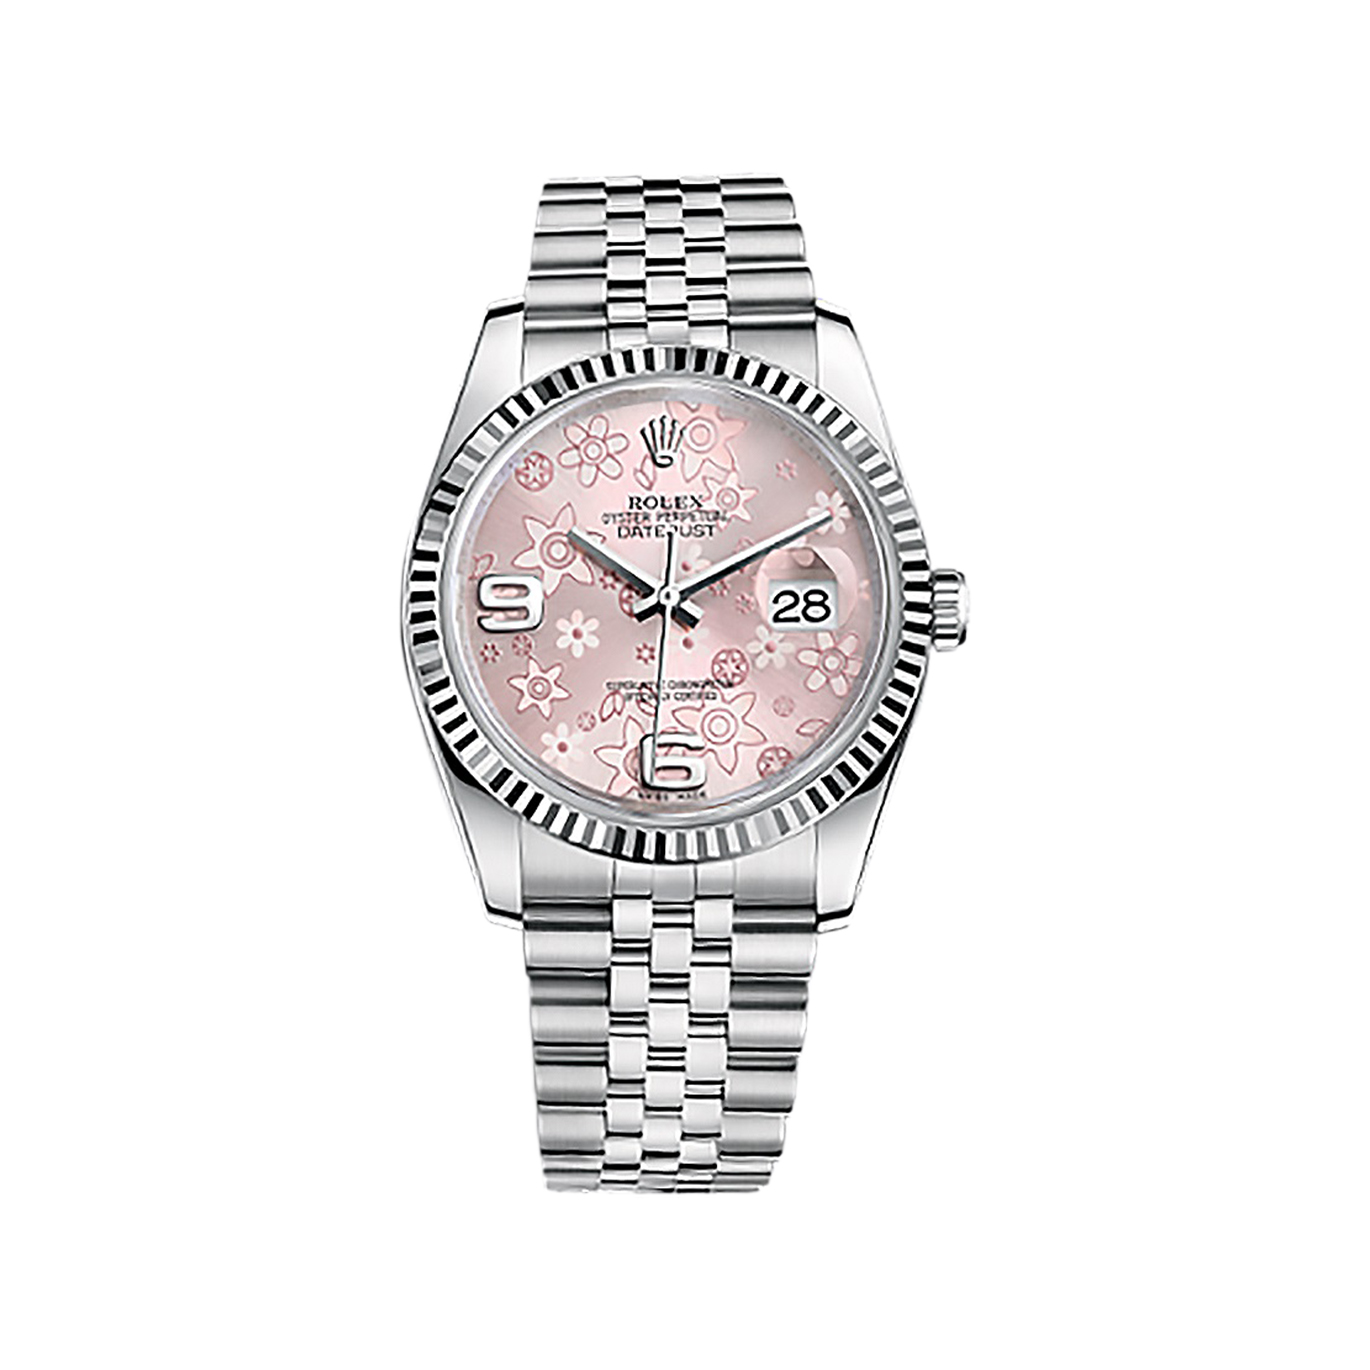 Datejust 36 116234 White Gold & Stainless Steel Watch (Pink Floral Motif) - Click Image to Close